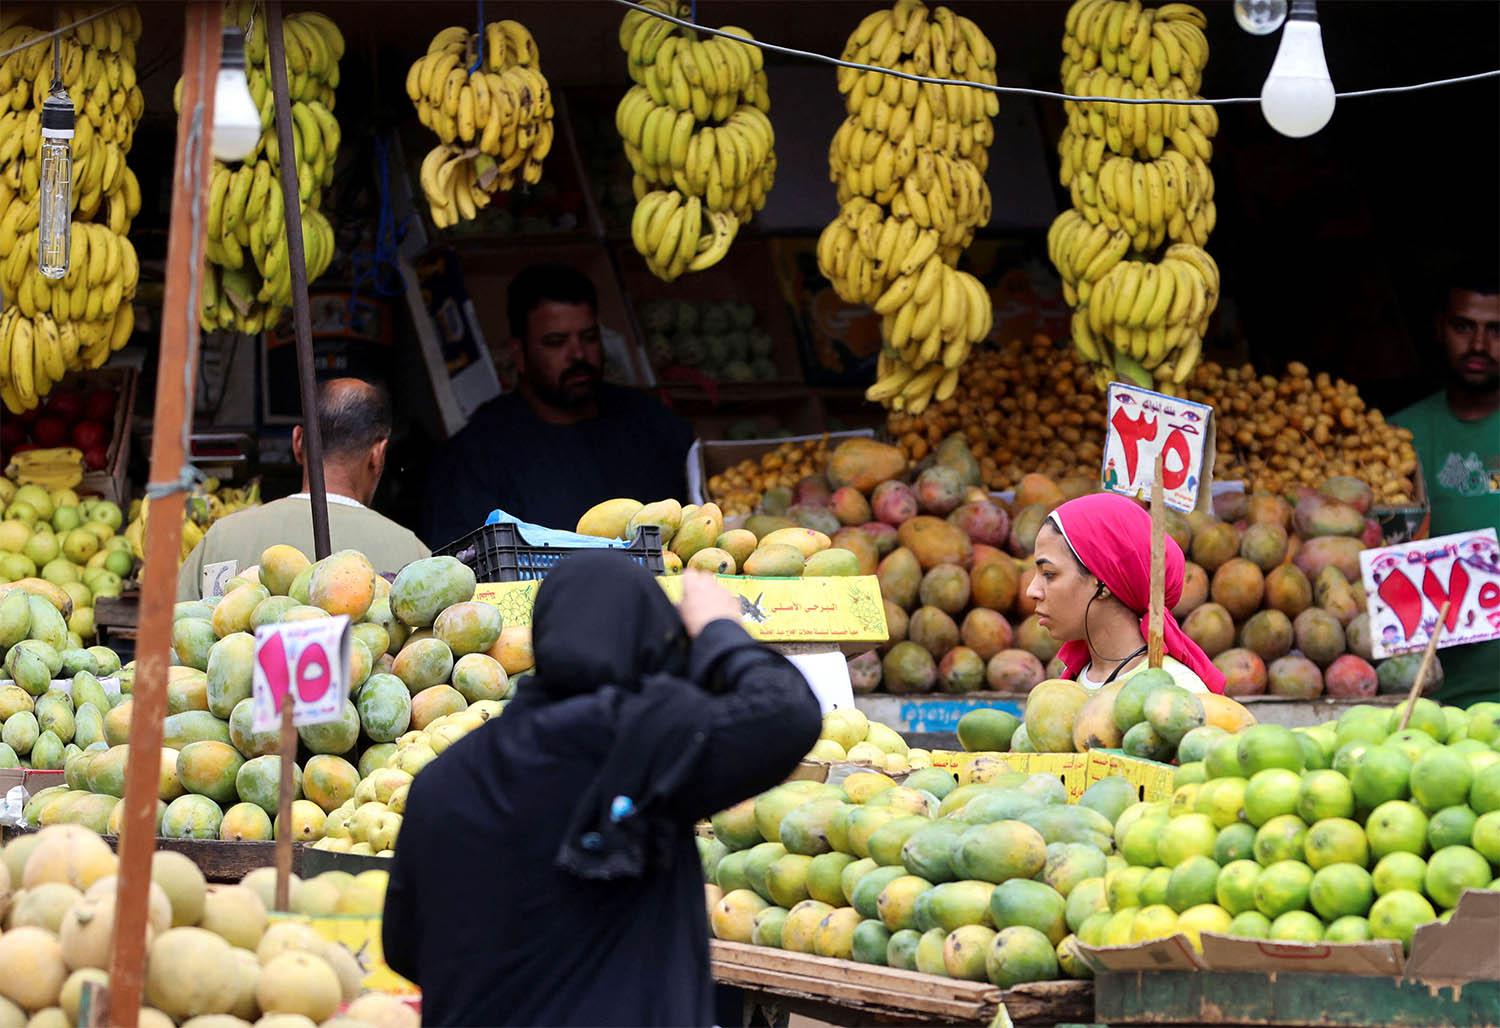 A woman shops at a market in Cairo